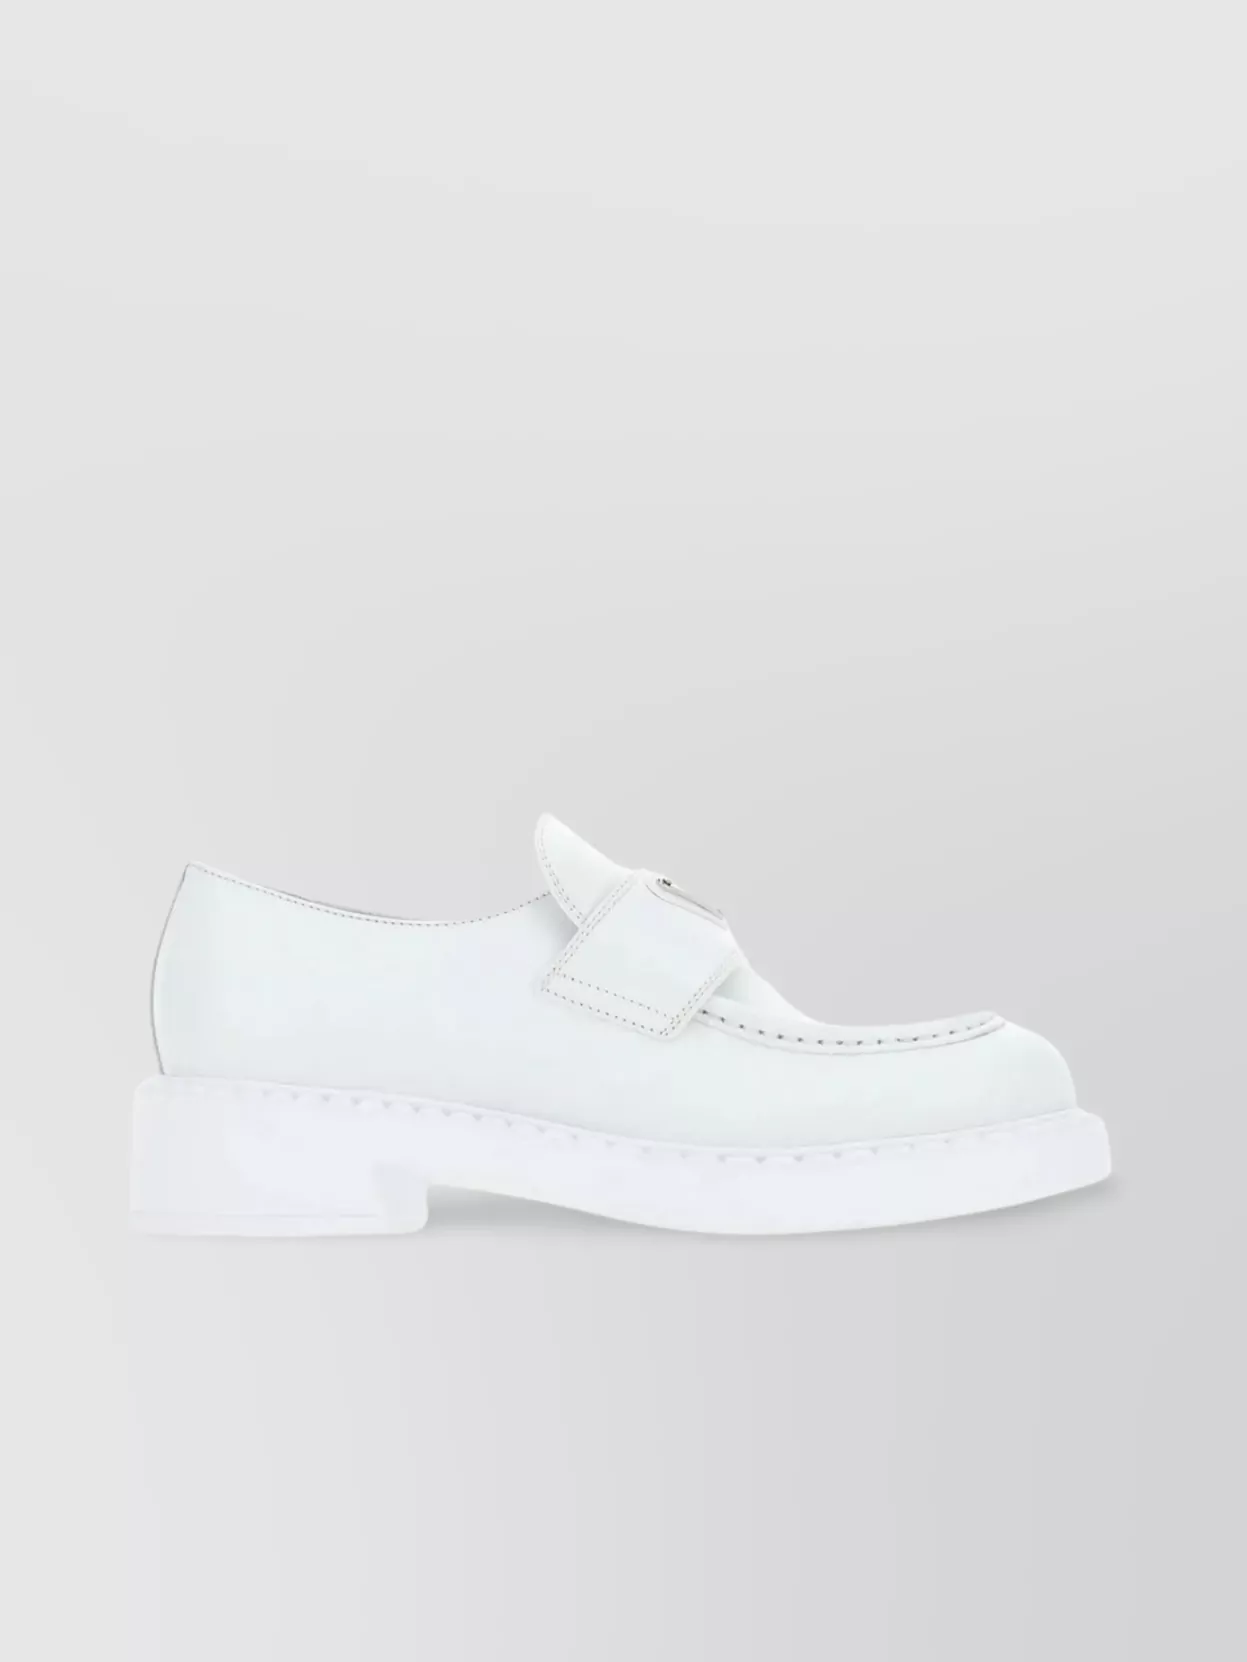 Prada Classic Round Toe Leather Loafers In White